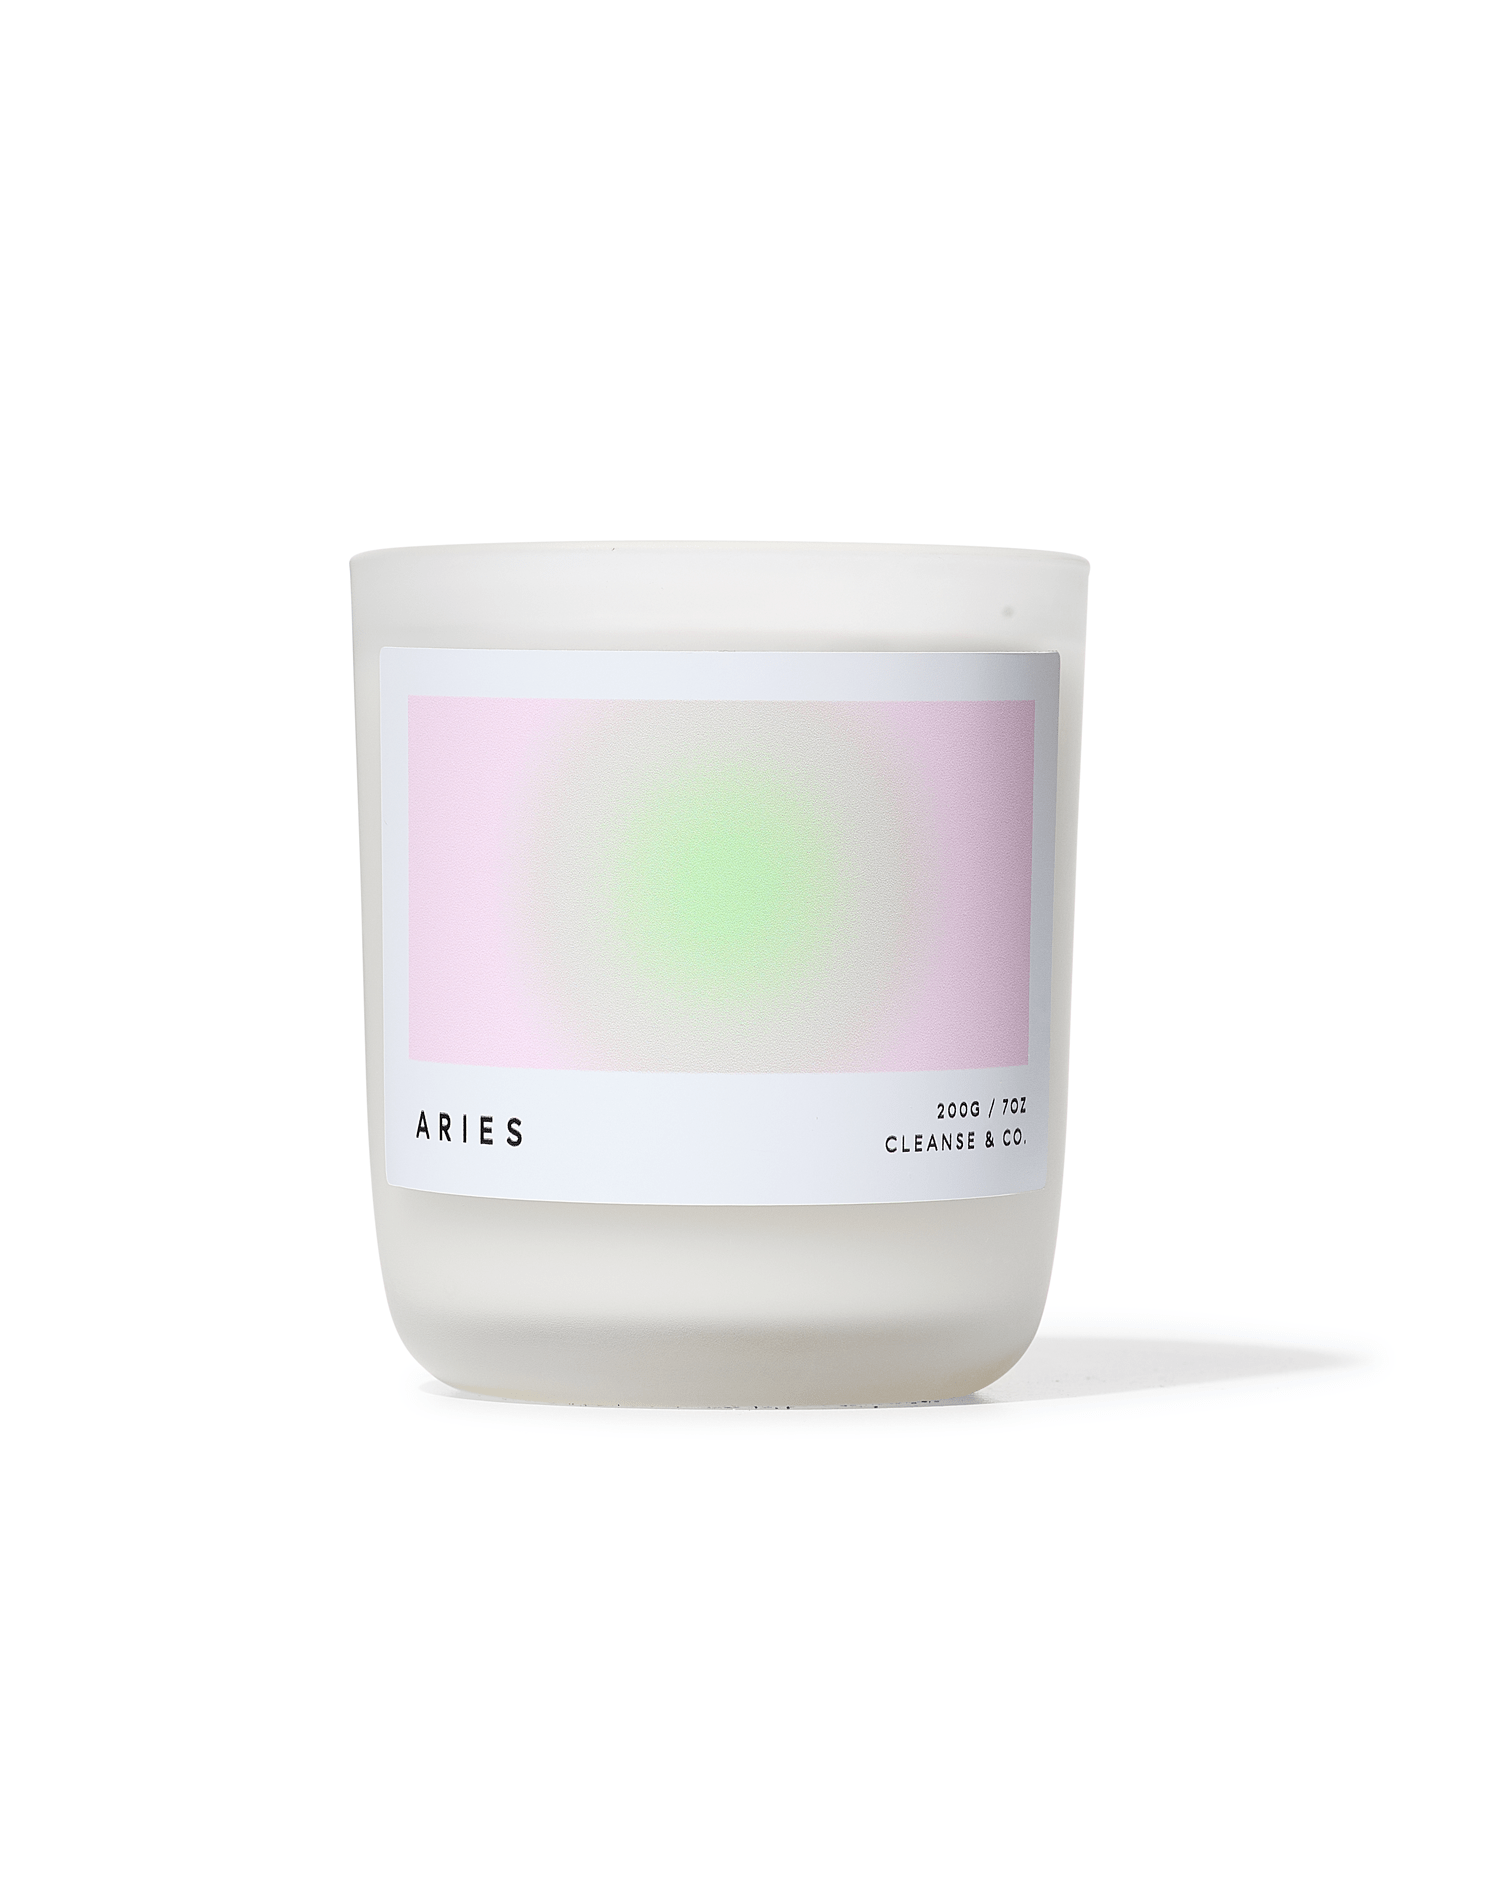 Aries - Aura Candle: 200G / Unscented by Cleanse & Co.